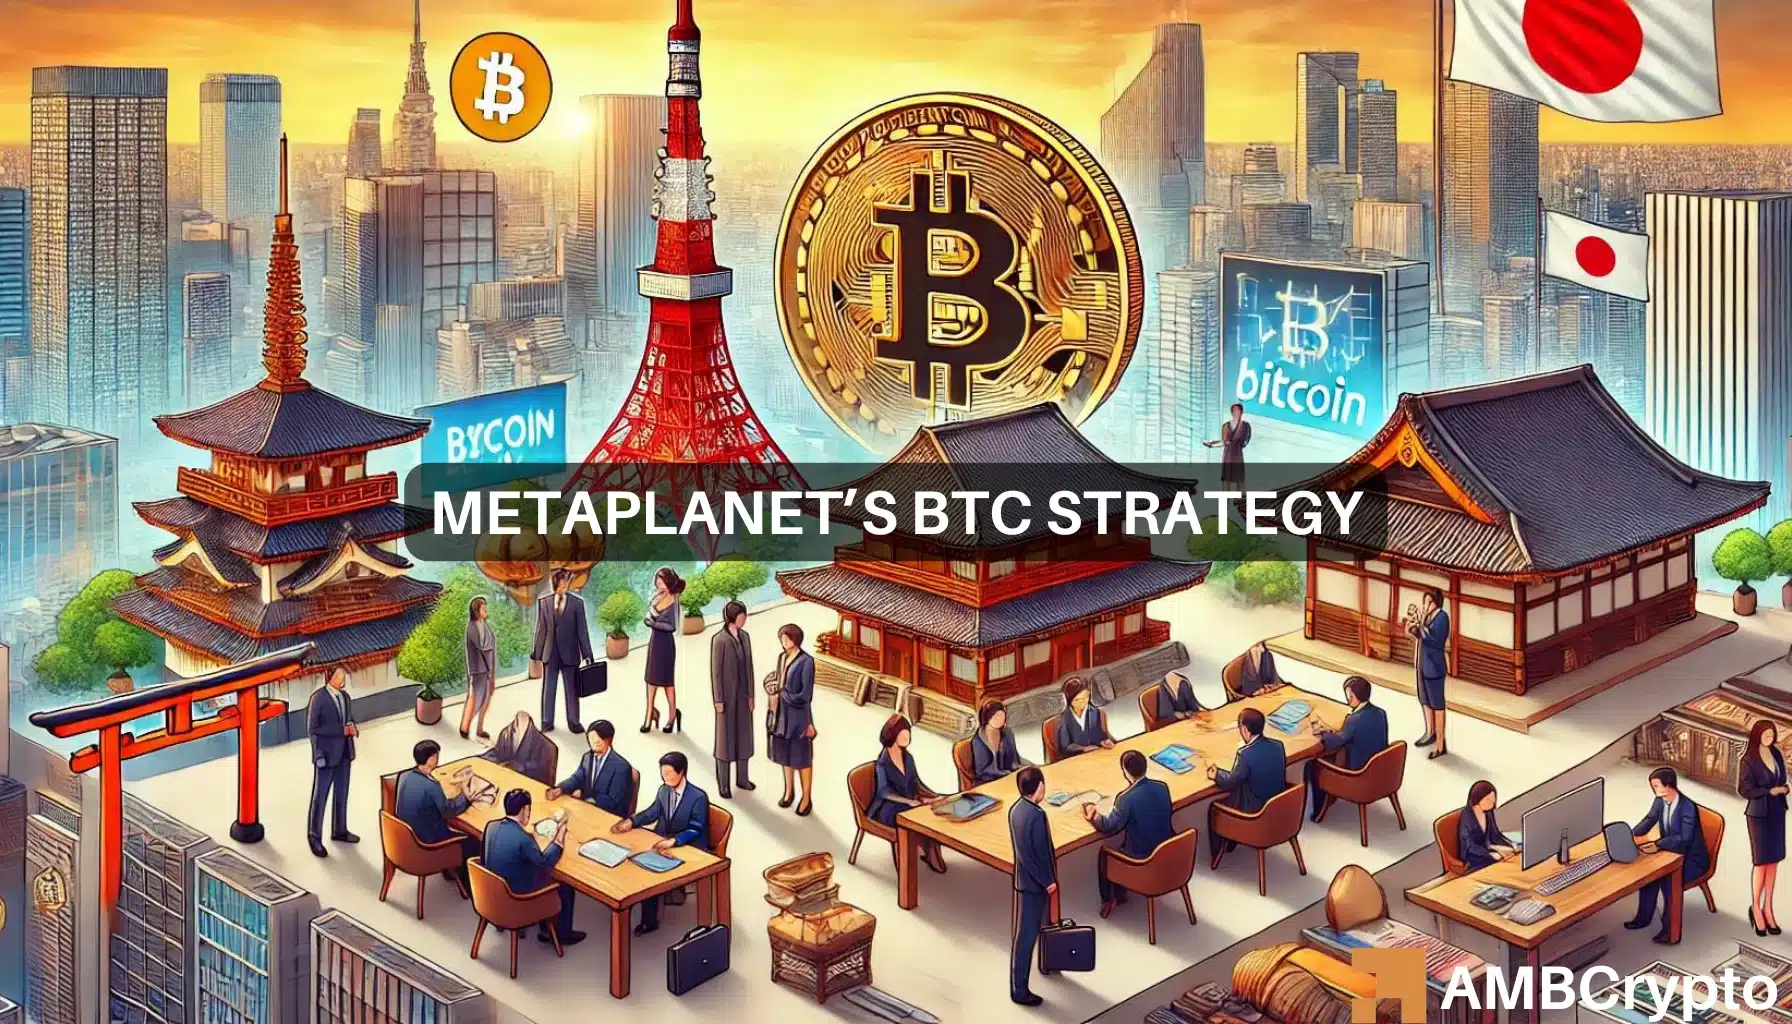 Bitcoin investment helps Metaplanet stock soar 900% YTD: What’s next?